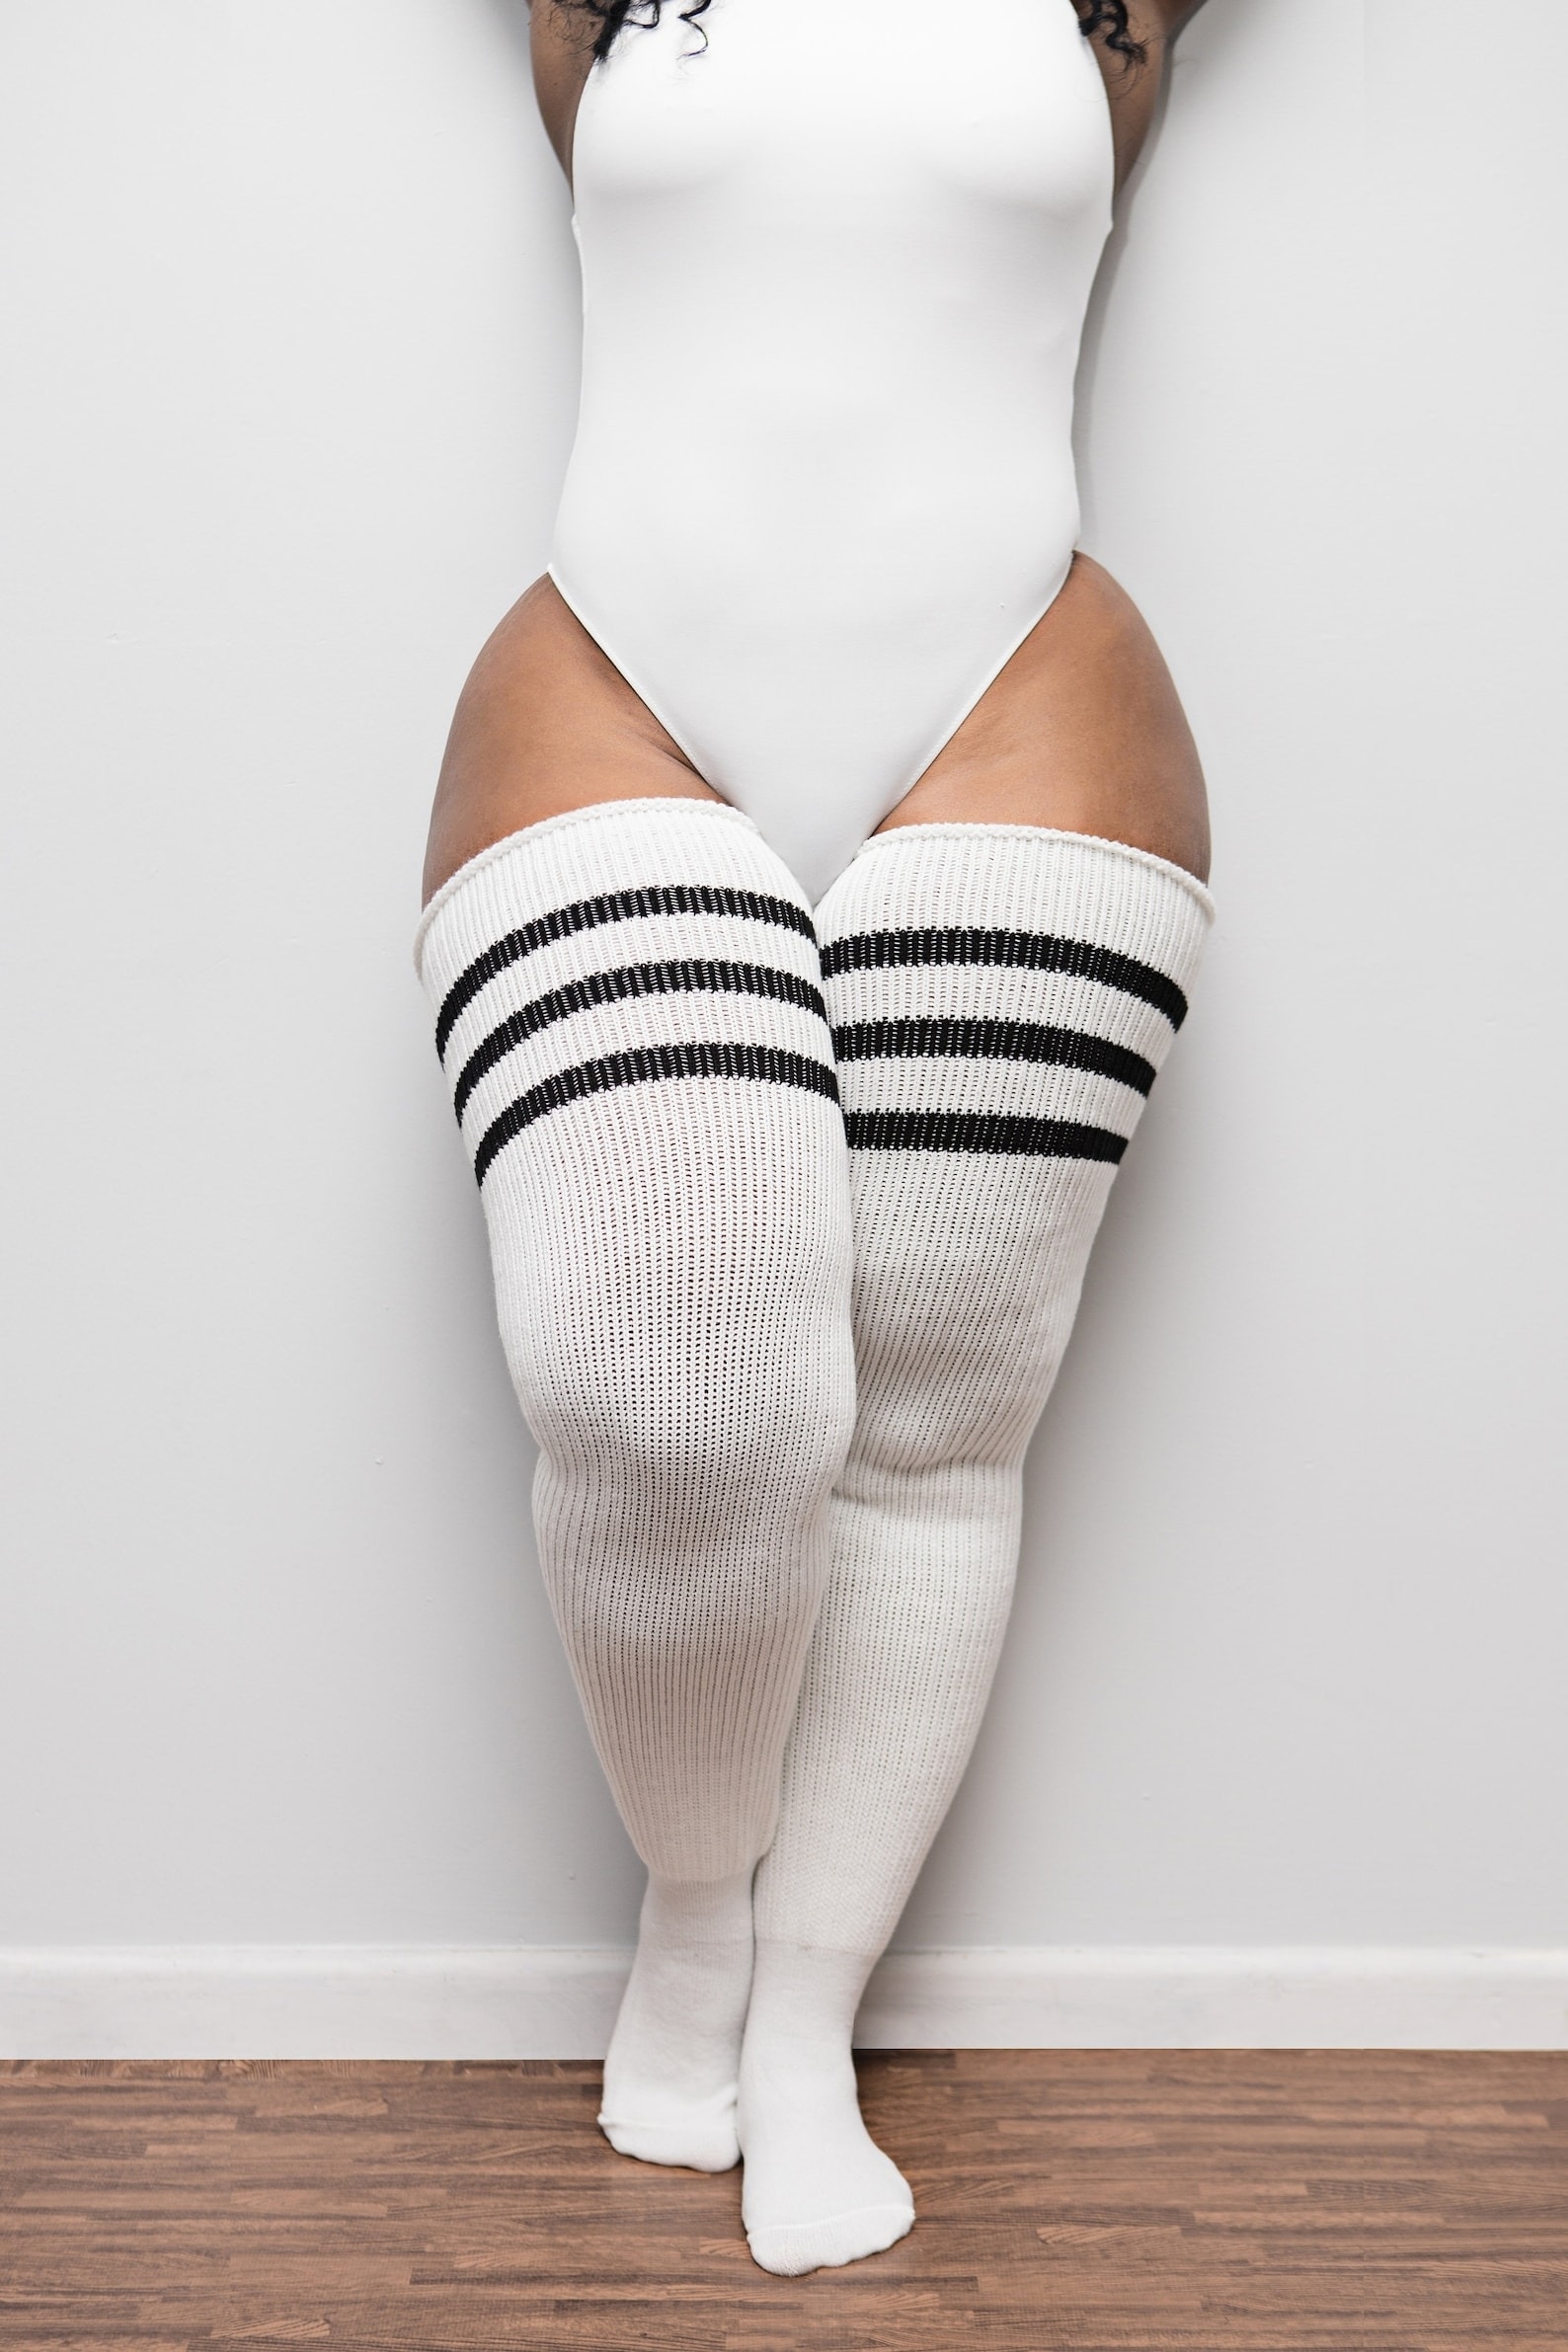 model wearing the white socks with black stripes